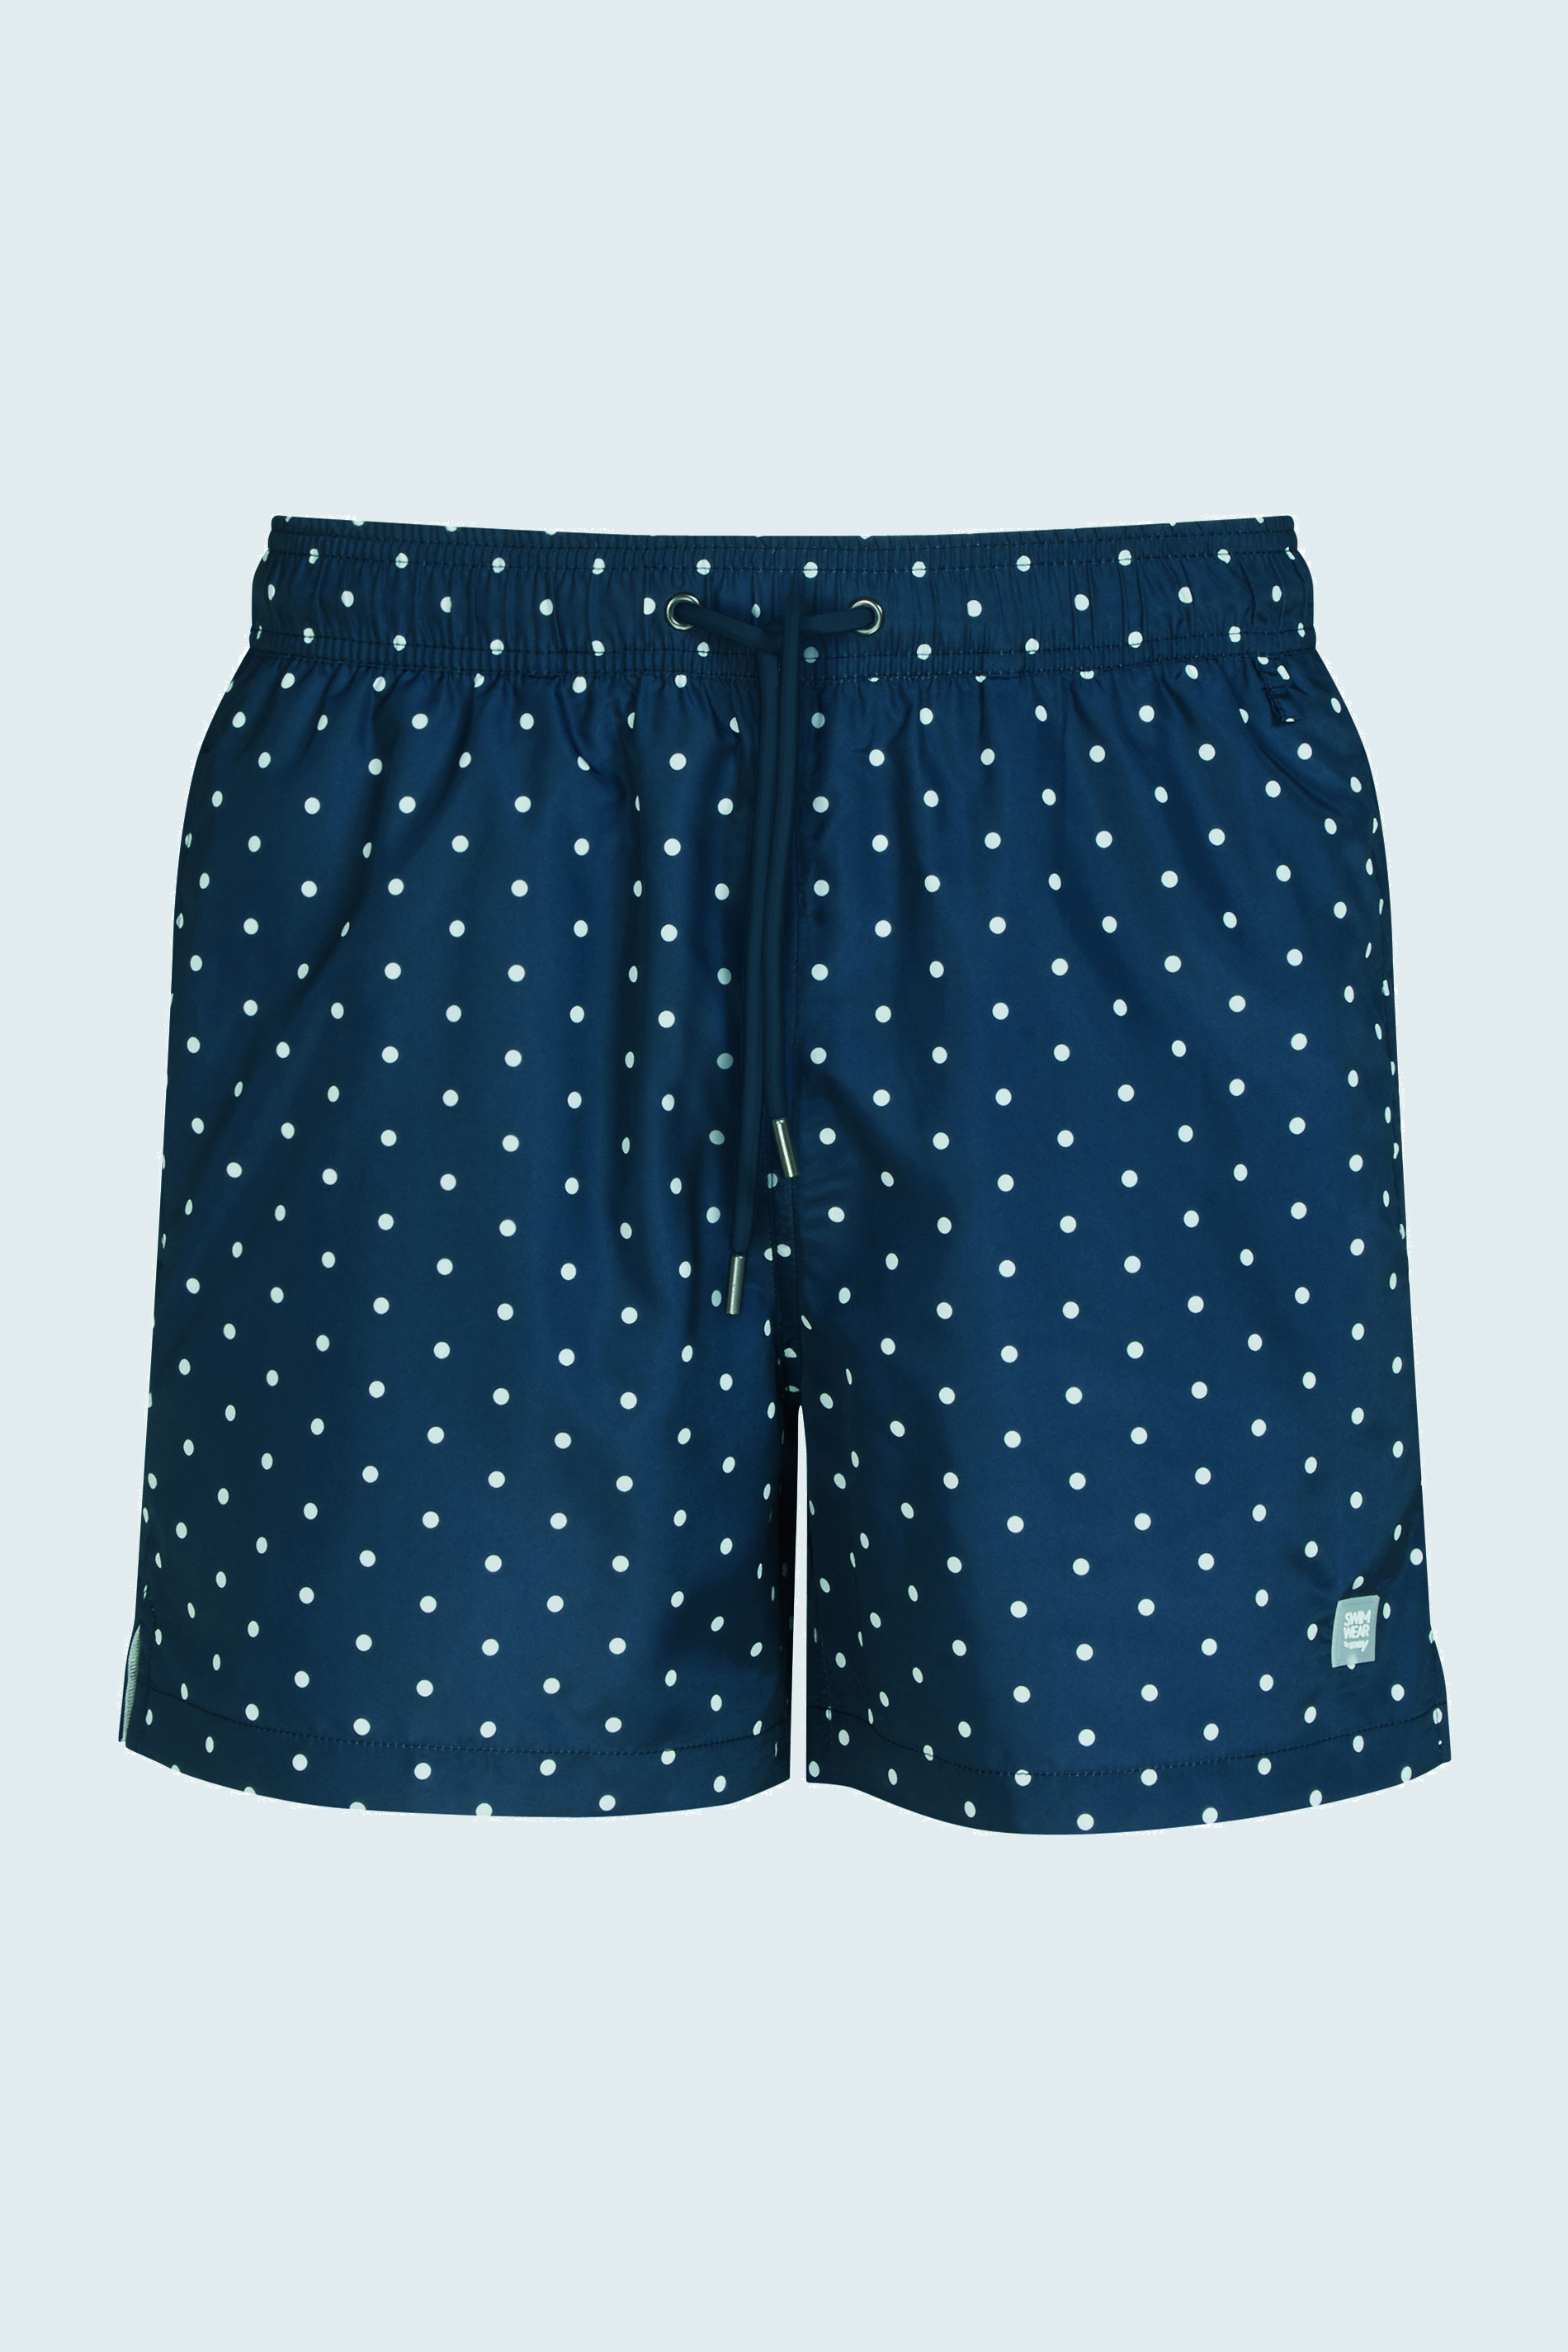 Zwemshorts Yacht Blue Serie Dots Uitknippen | mey®